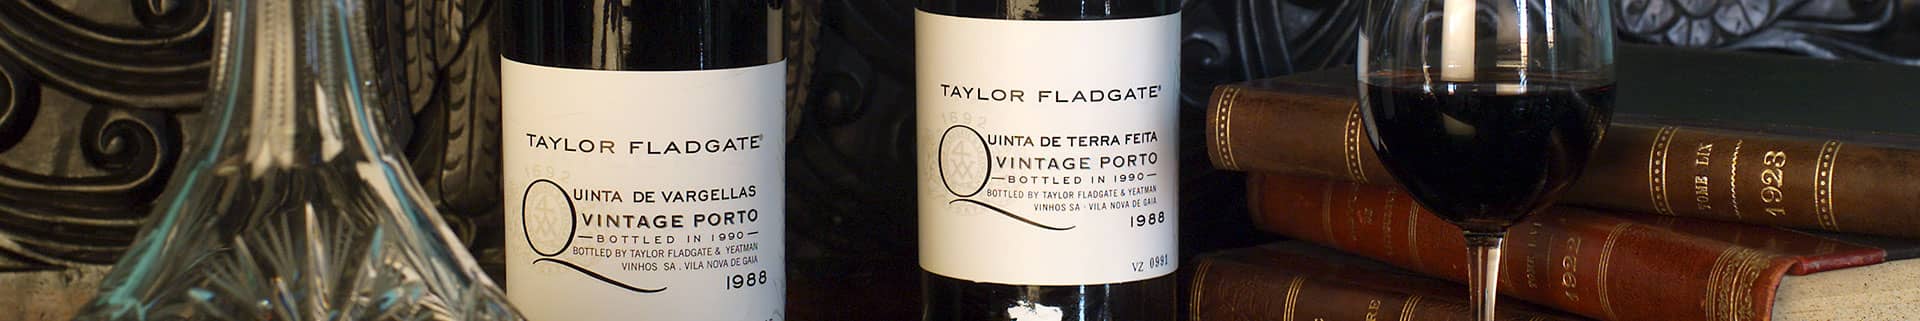 Since its foundation in 1692, Taylor Fladgate has been dedicated to making the finest Port.

The house remains entirely focused on Port...